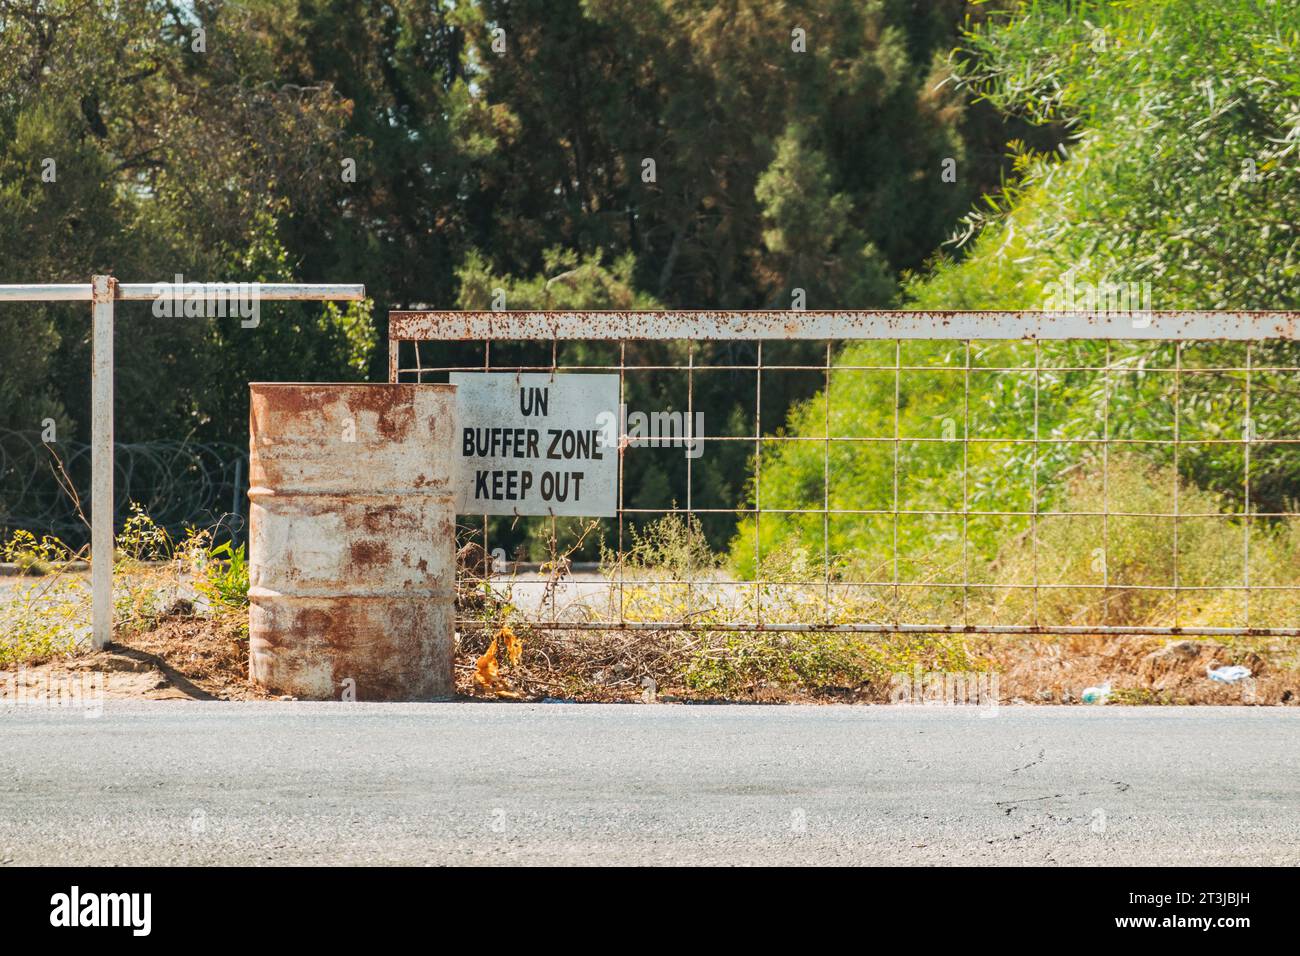 a sign reads "UN Buffer Zone, Keep Out" at a border crossing between the northern and southern regions of the island of Cyprus Stock Photo